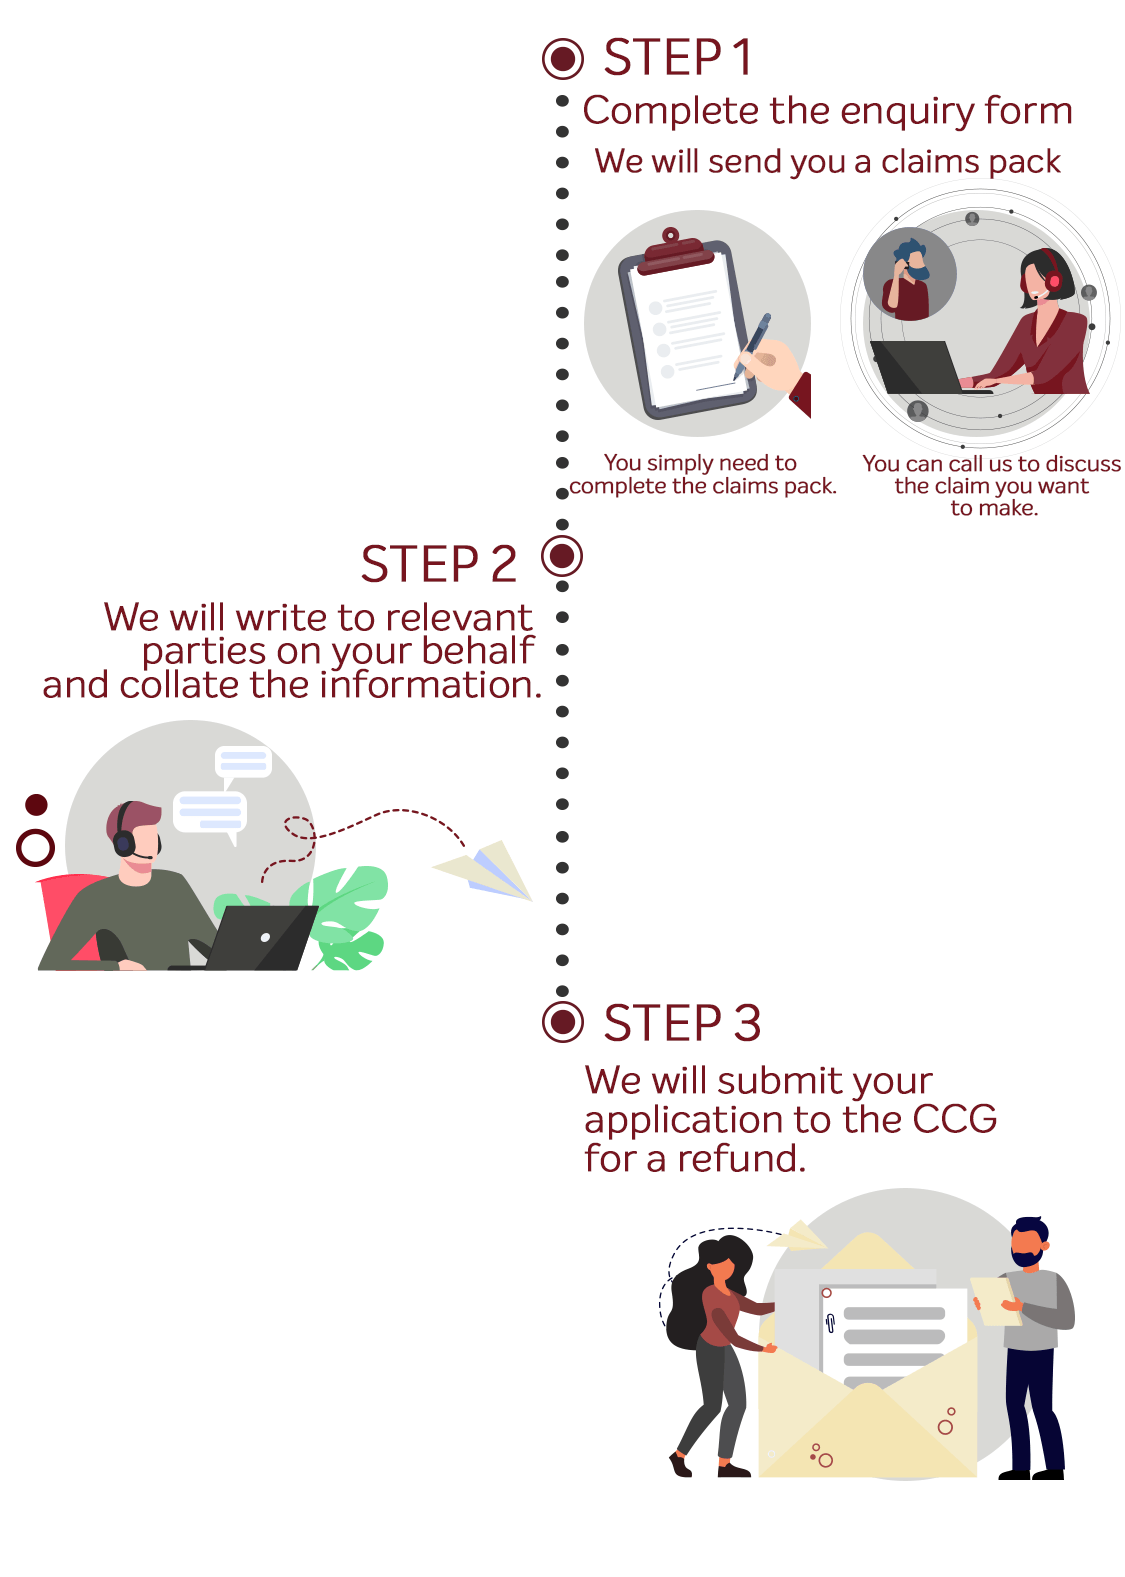 A diagram showing how to complete an enquiry form.